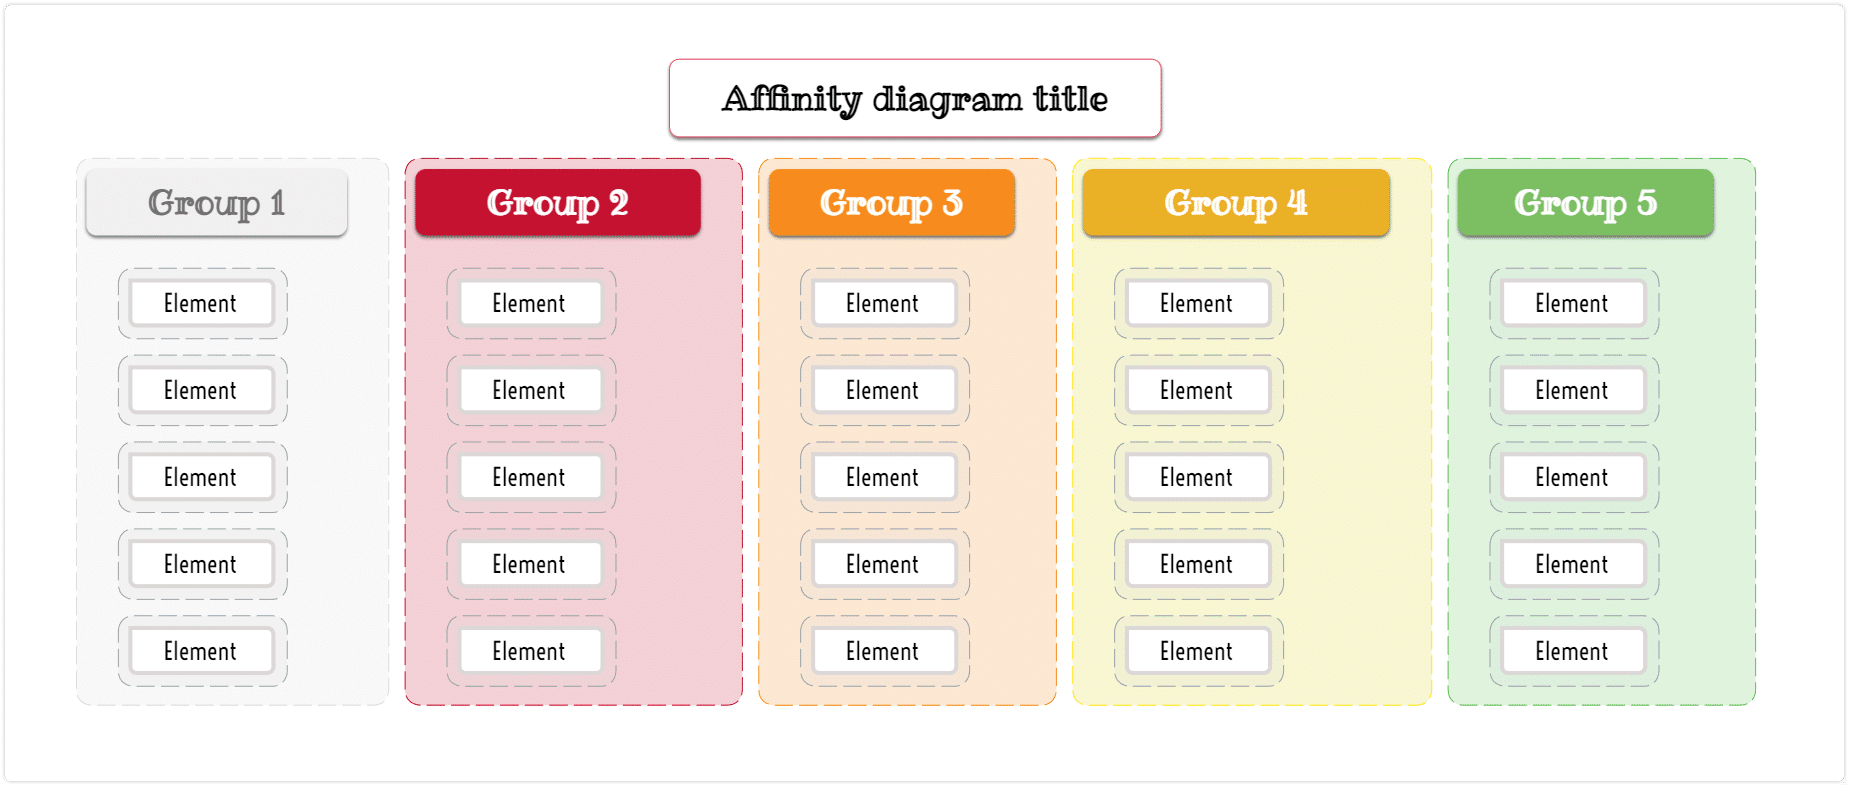 Affinity diagram structure example